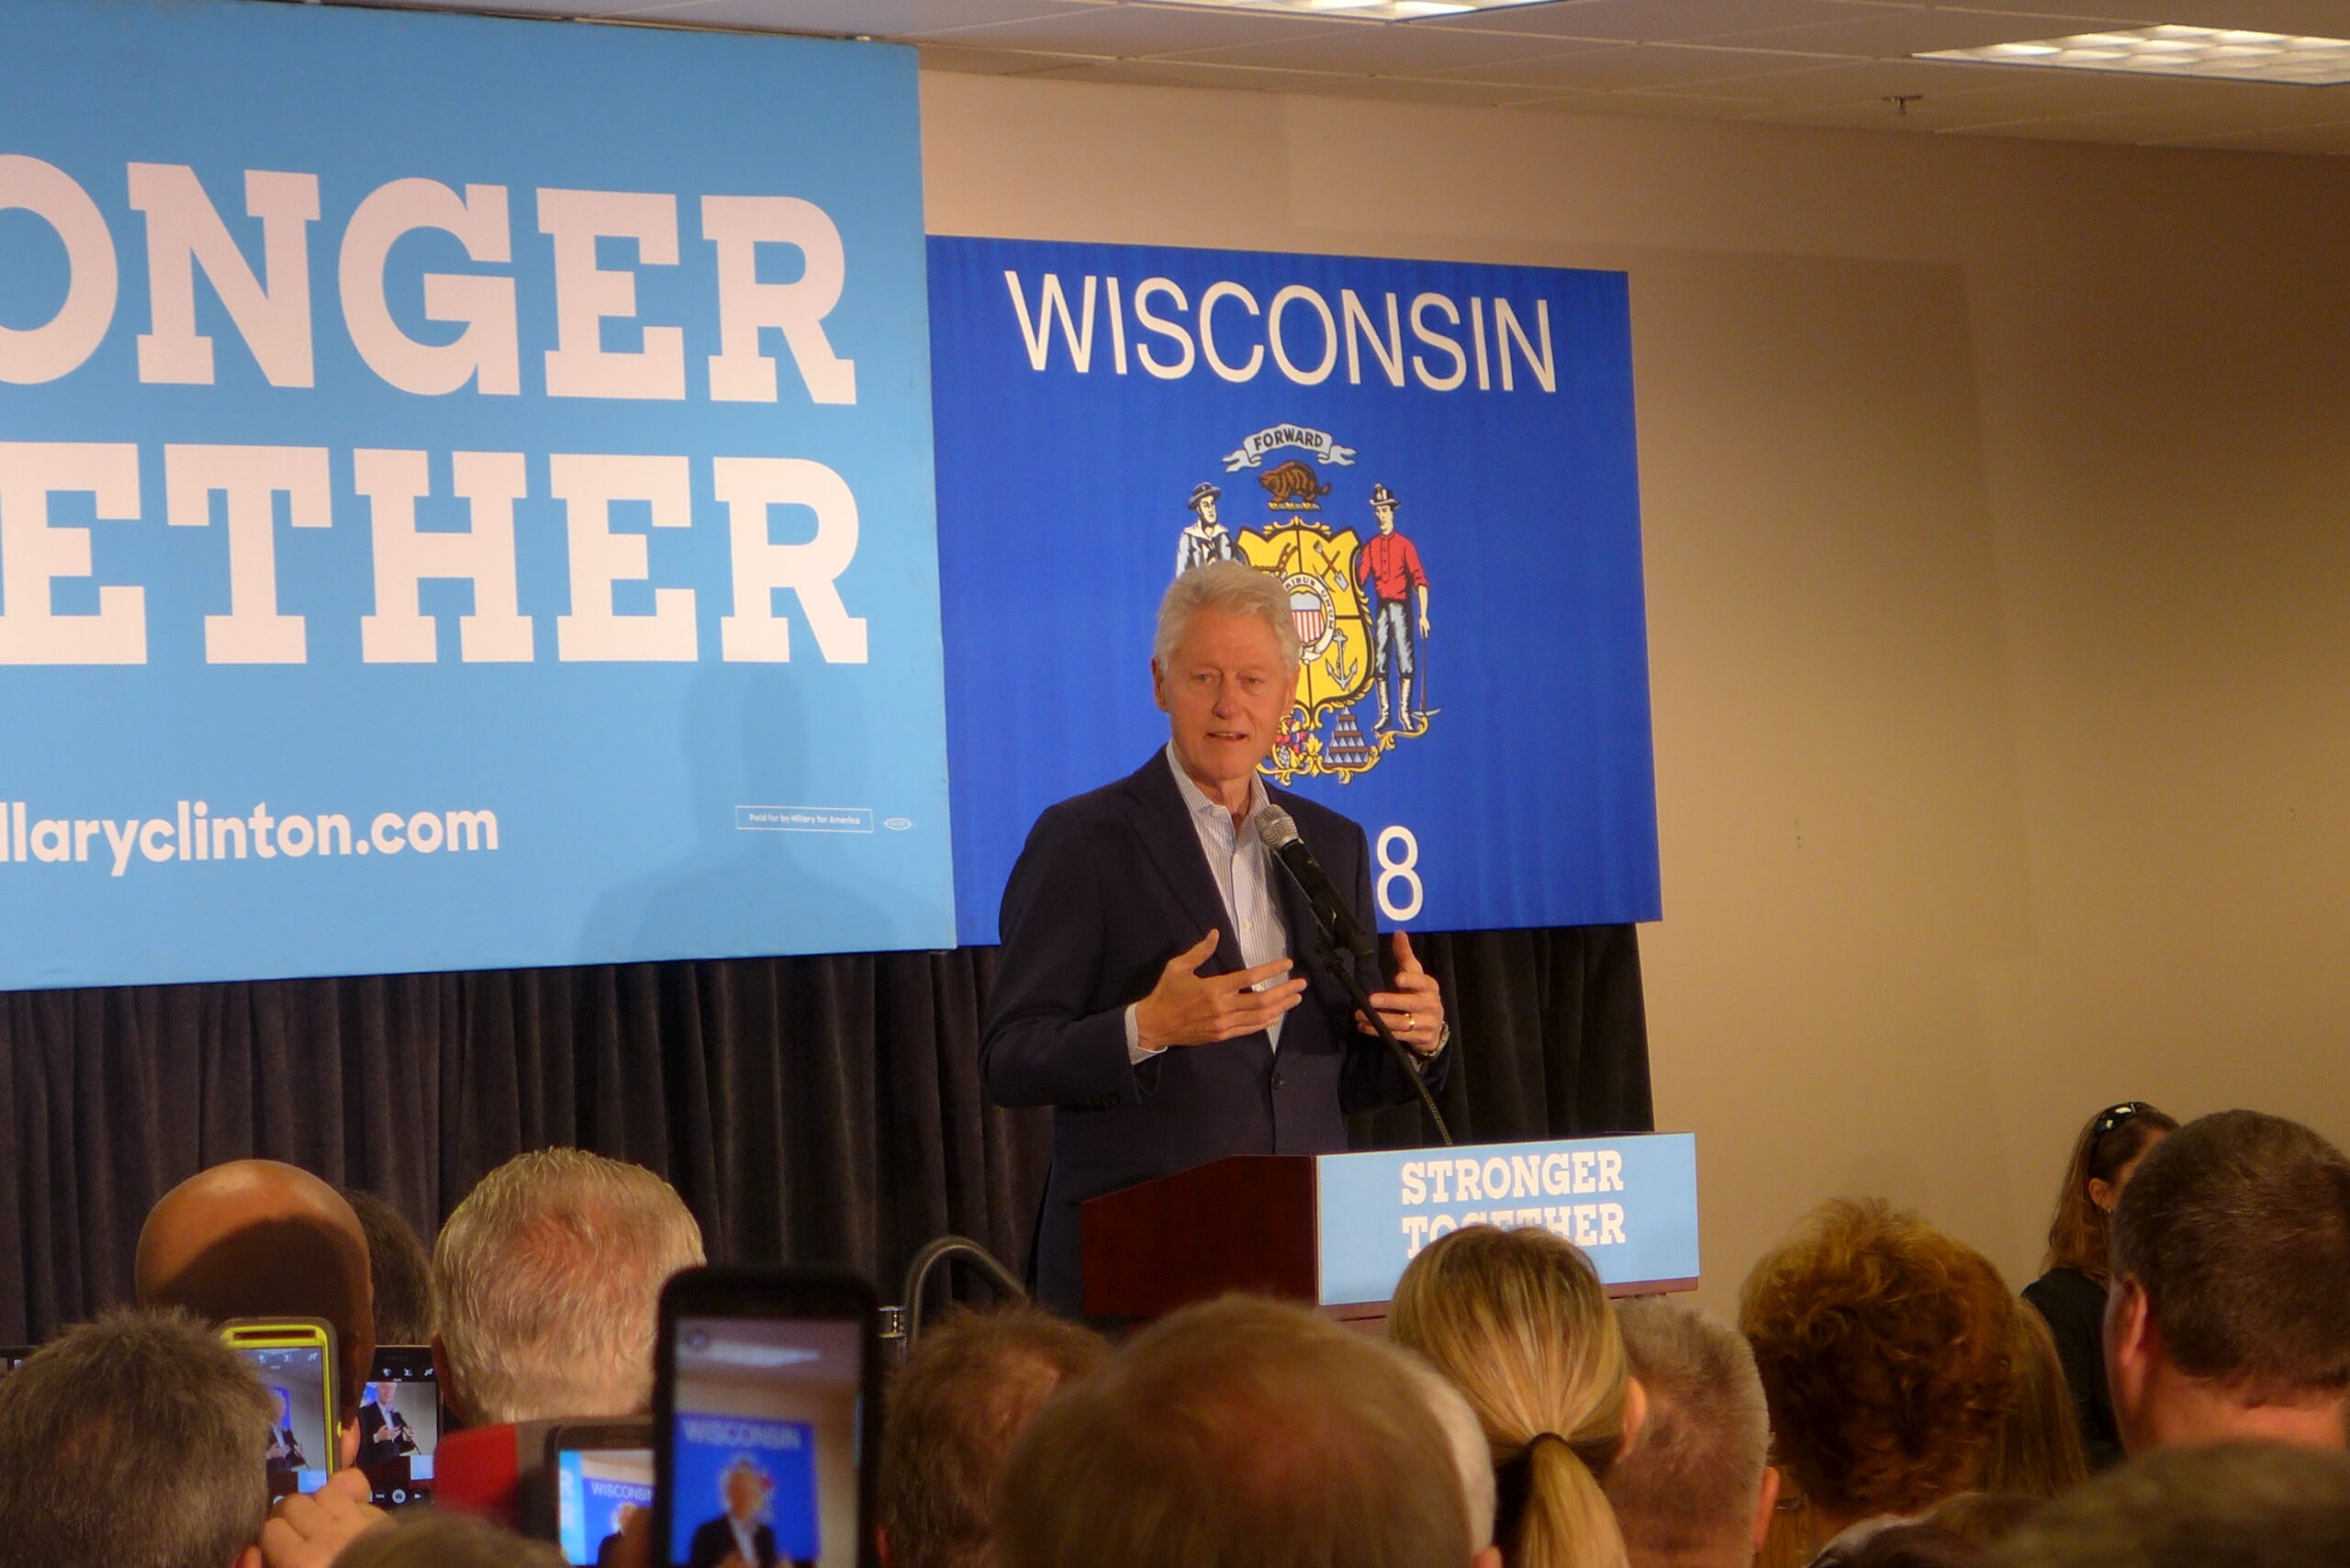 Former President Bill Clinton campaigns for Hillary in Milwaukee